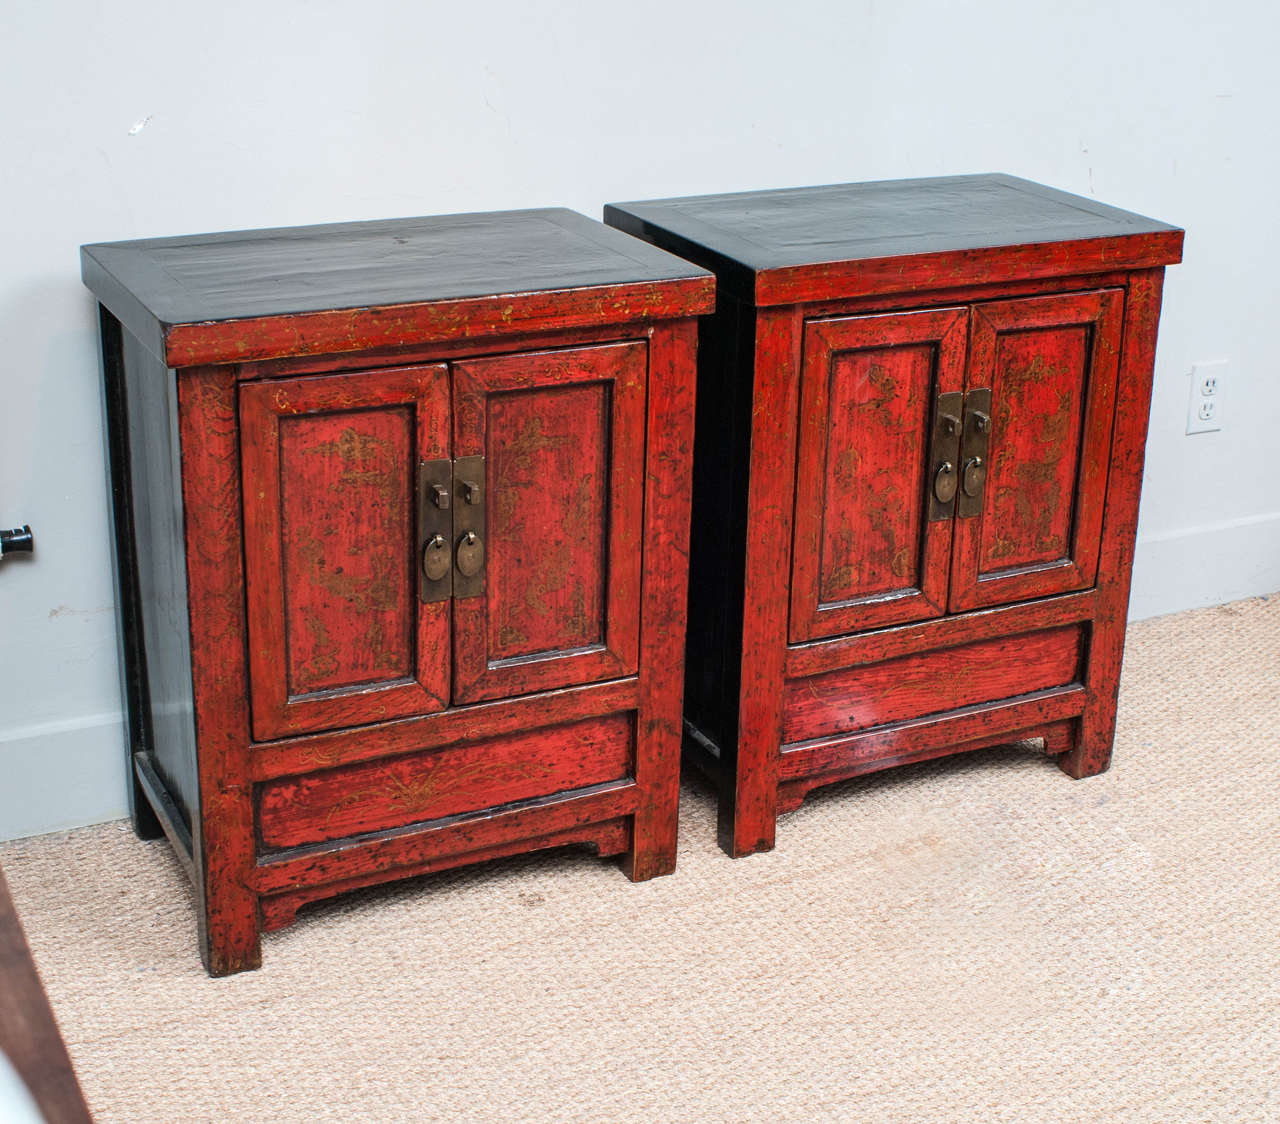 Exquisitely conserved original lacquer with subtle traces of hand painting on the doors. Perfect as bedside chests or end tables.